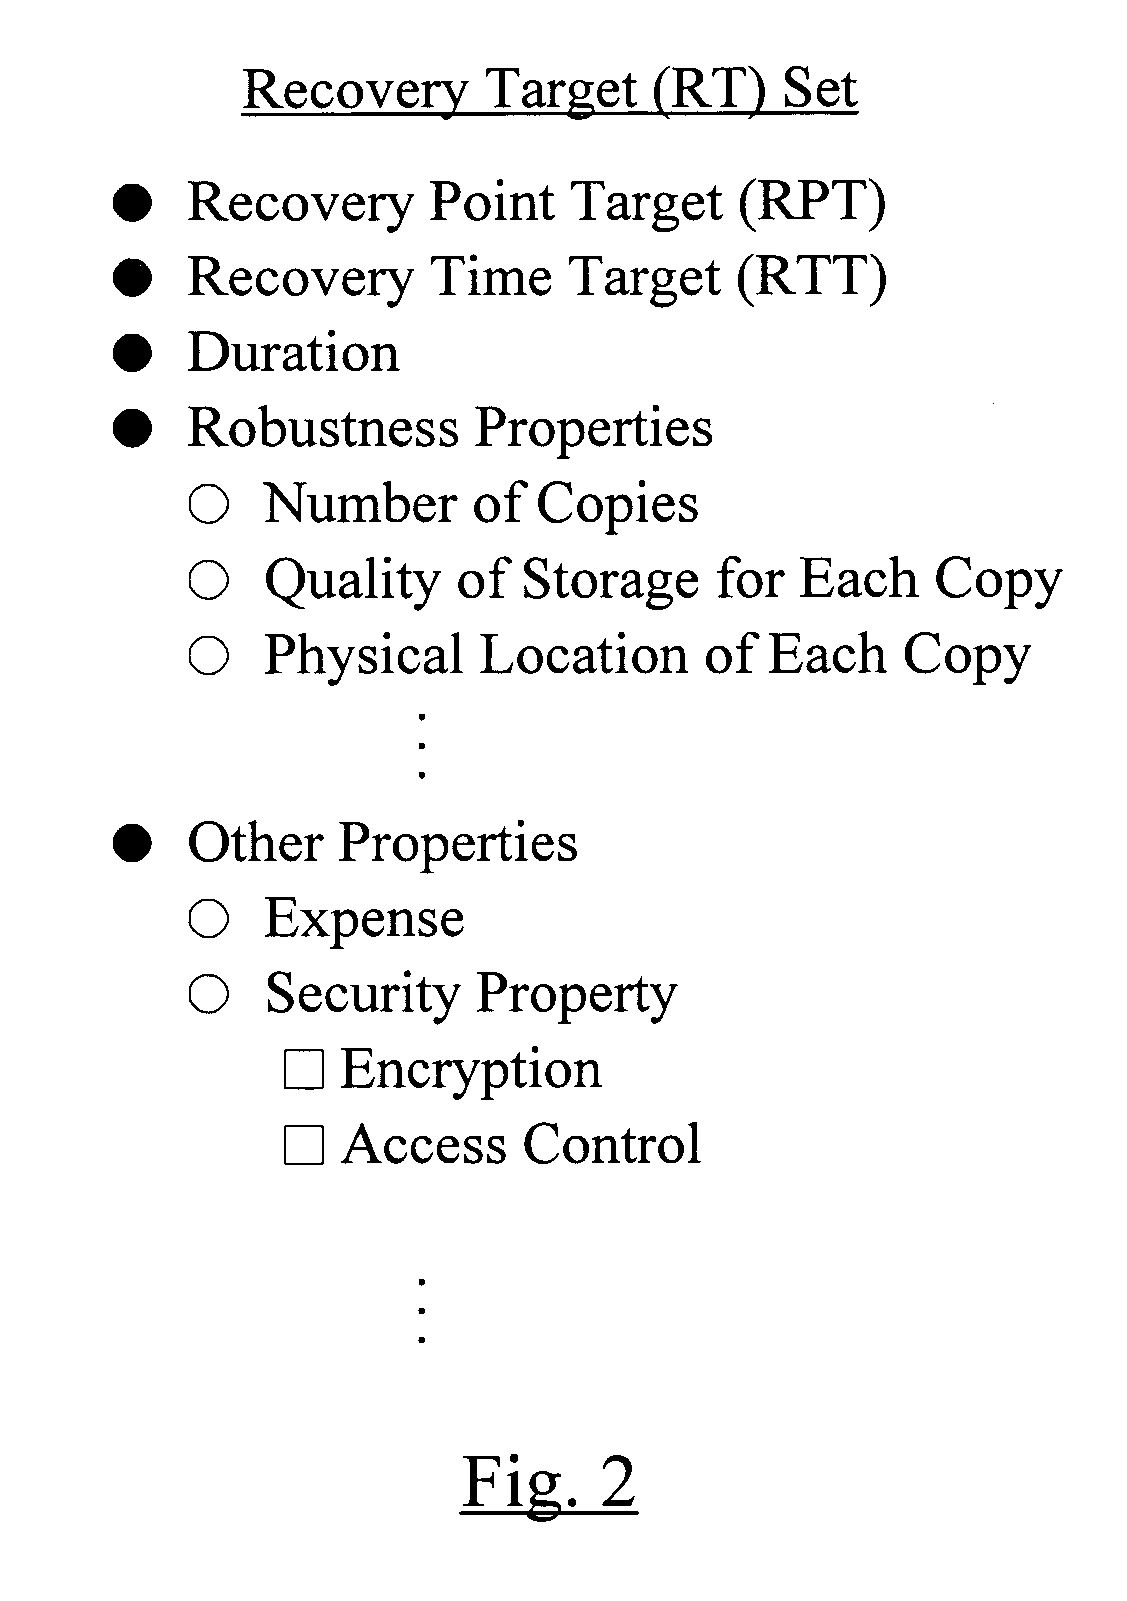 Classification of recovery targets to enable automated protection setup